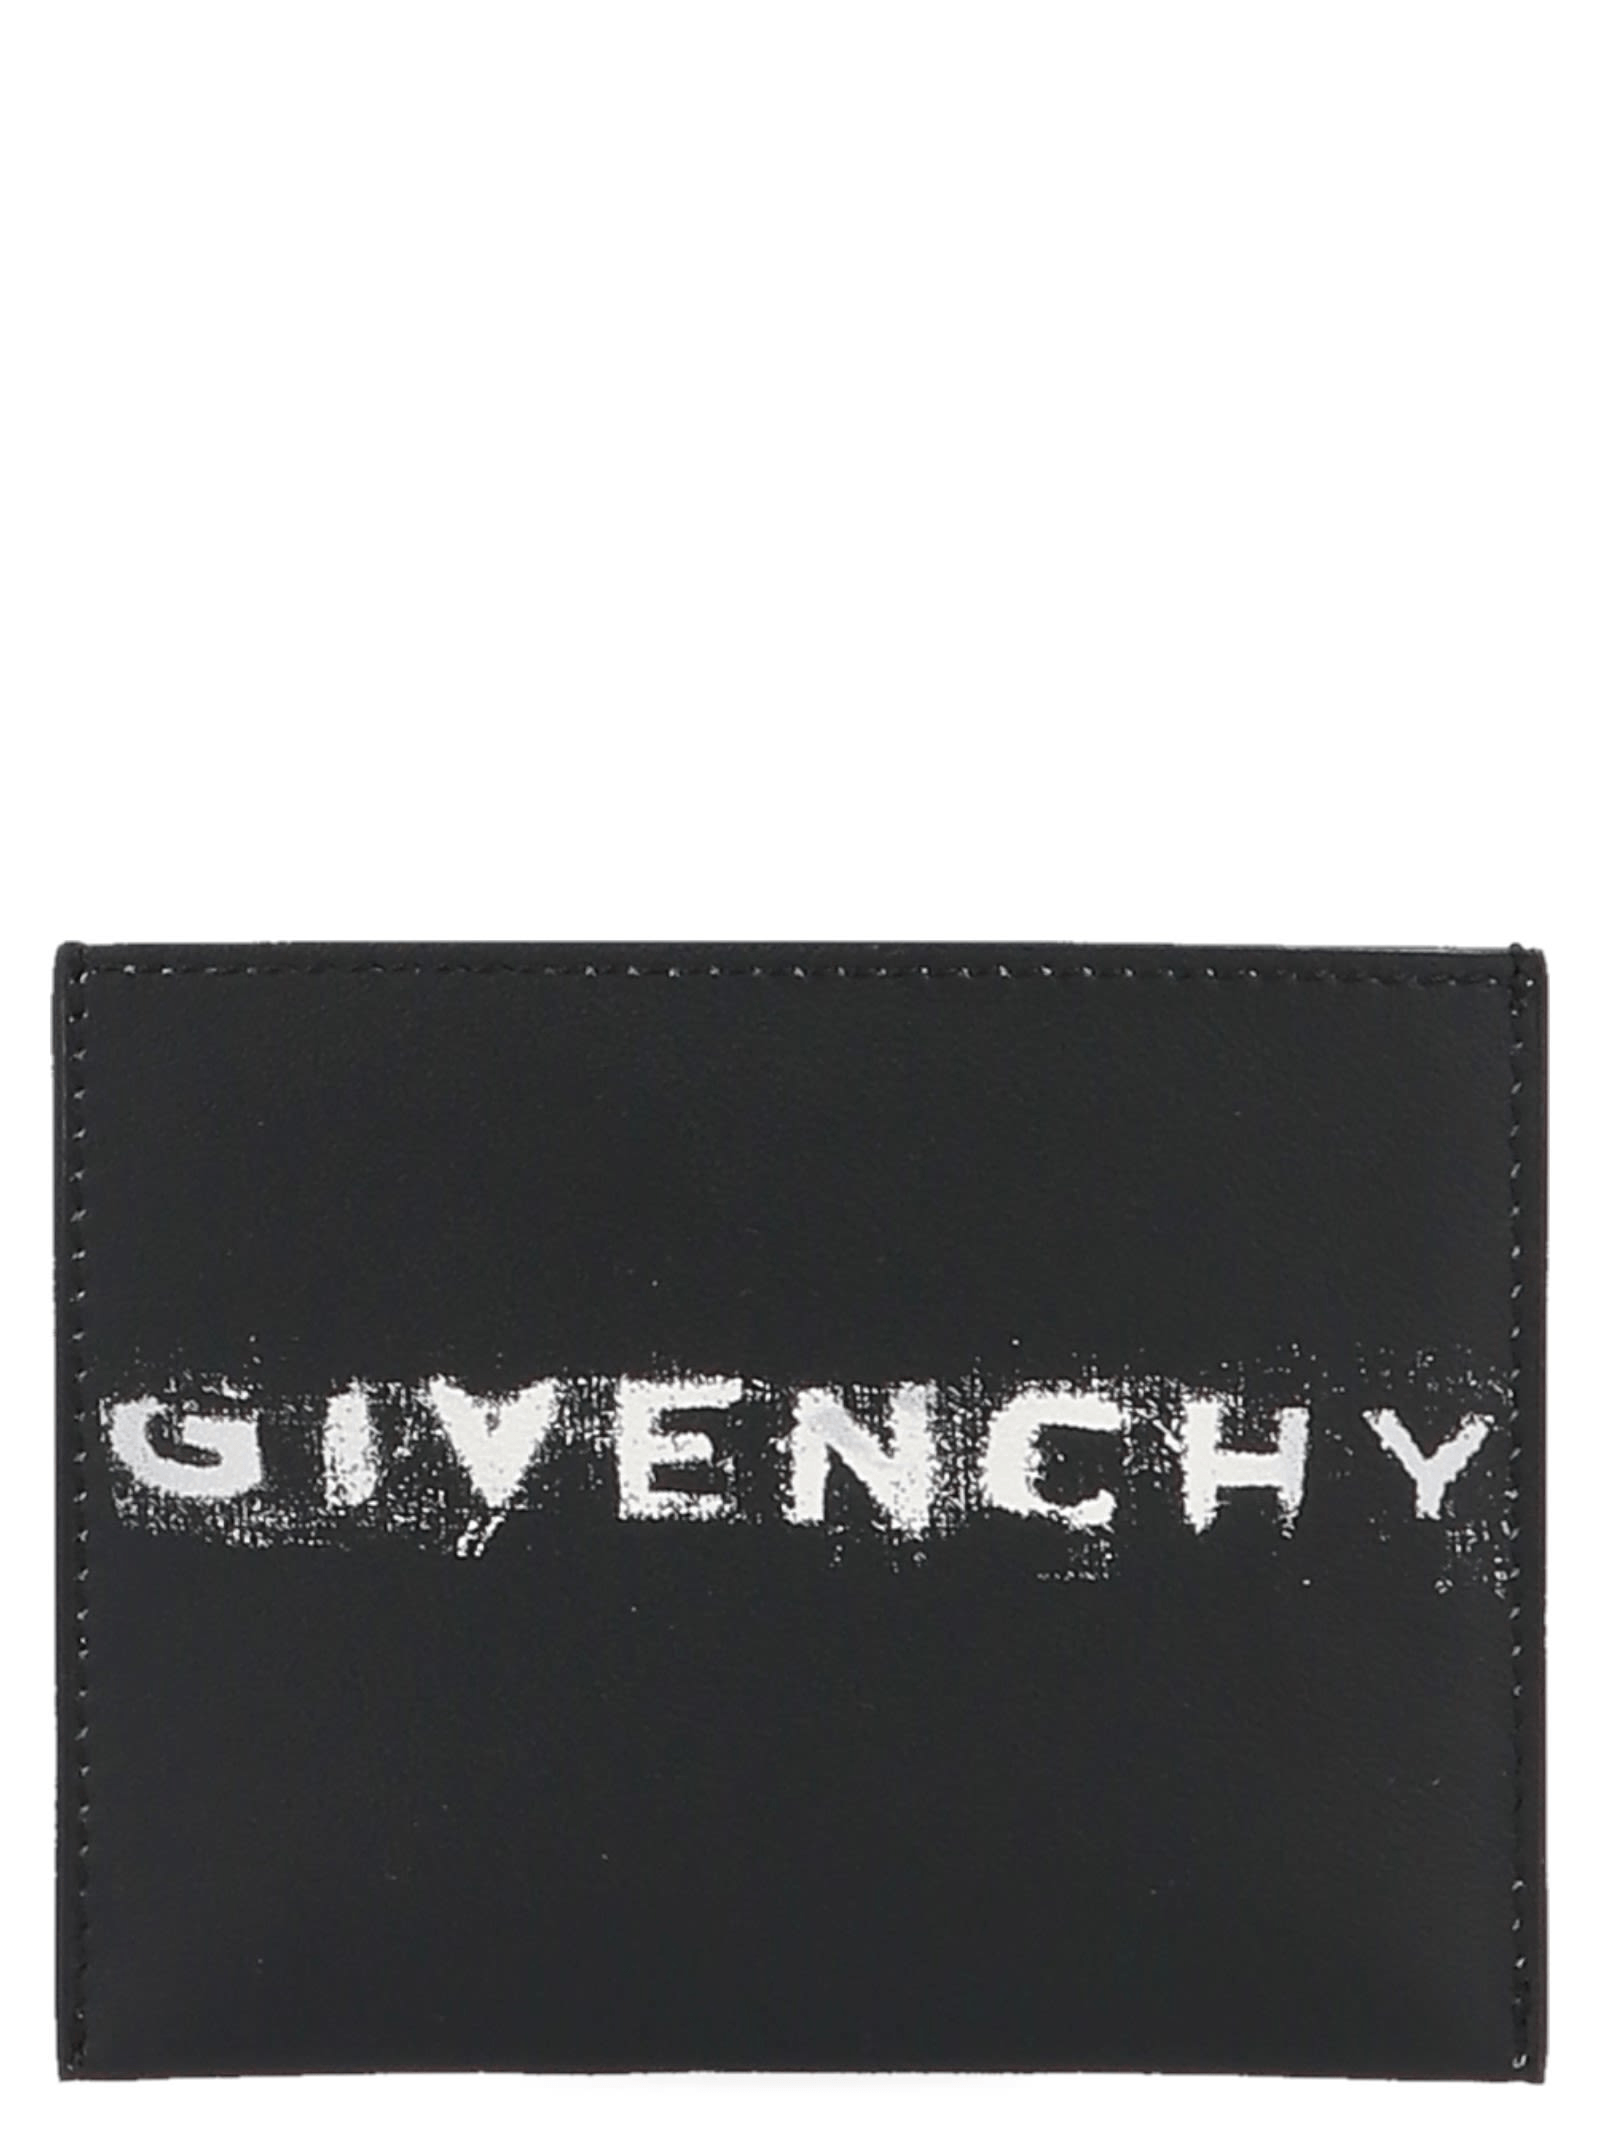 Faded Logo - Givenchy Faded Logo Cardholder in Black